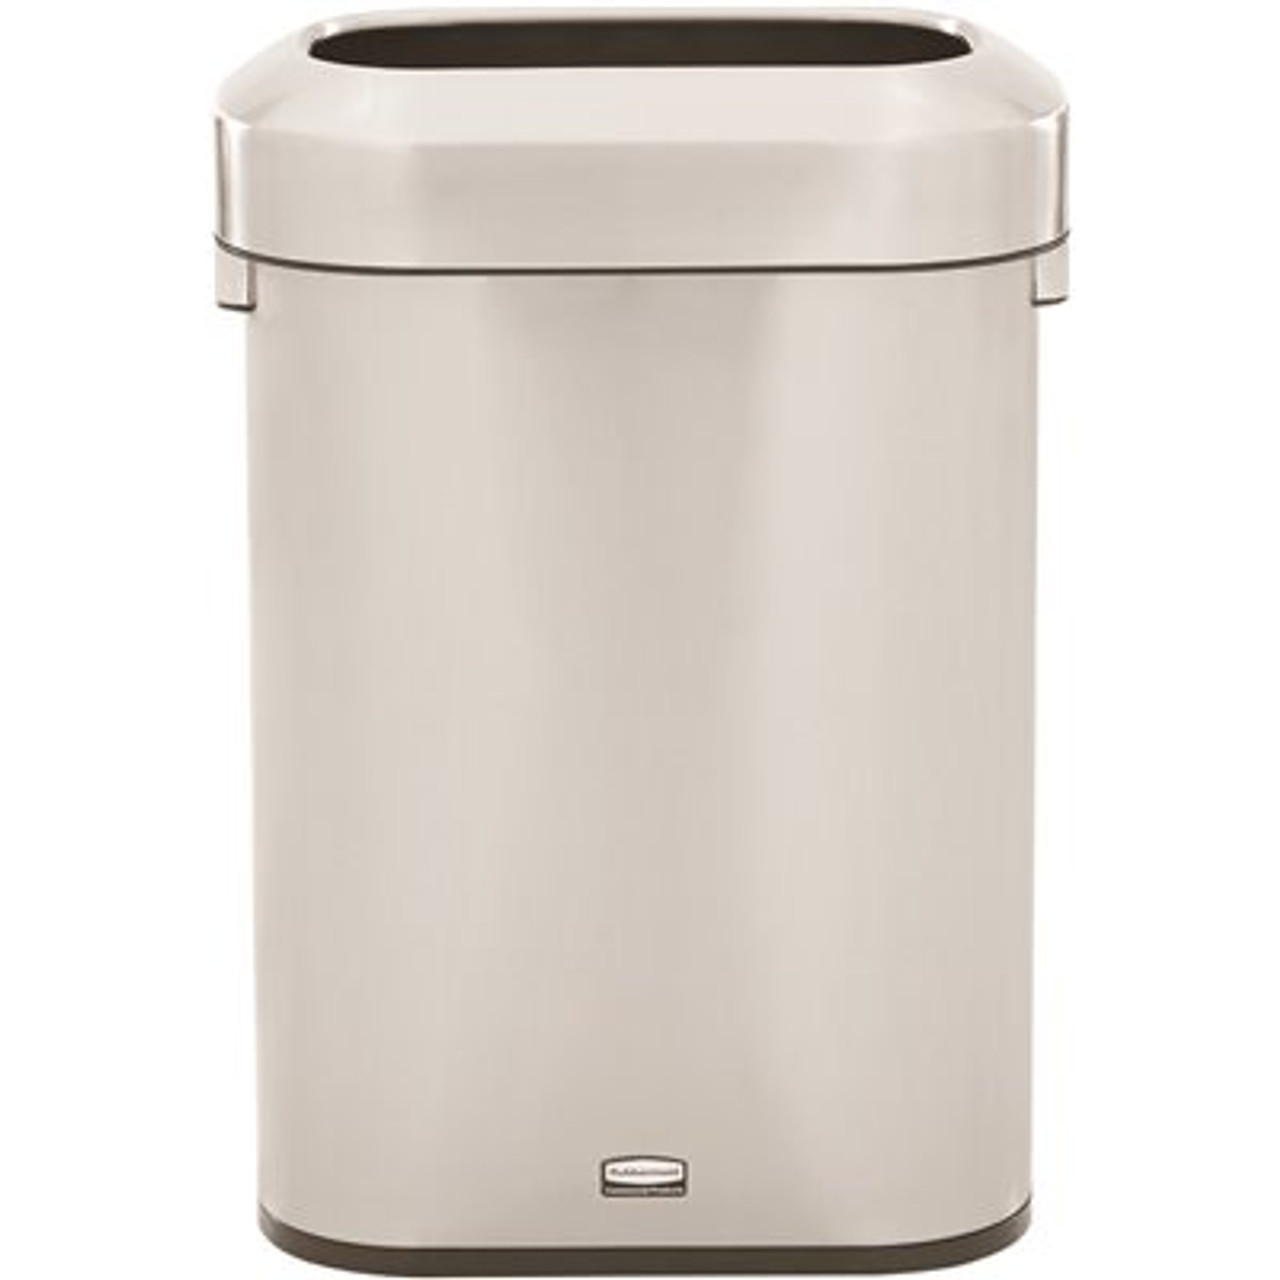 Rubbermaid Commercial Products Refine 15 Gal. Slim Stainless Steel Trash Can